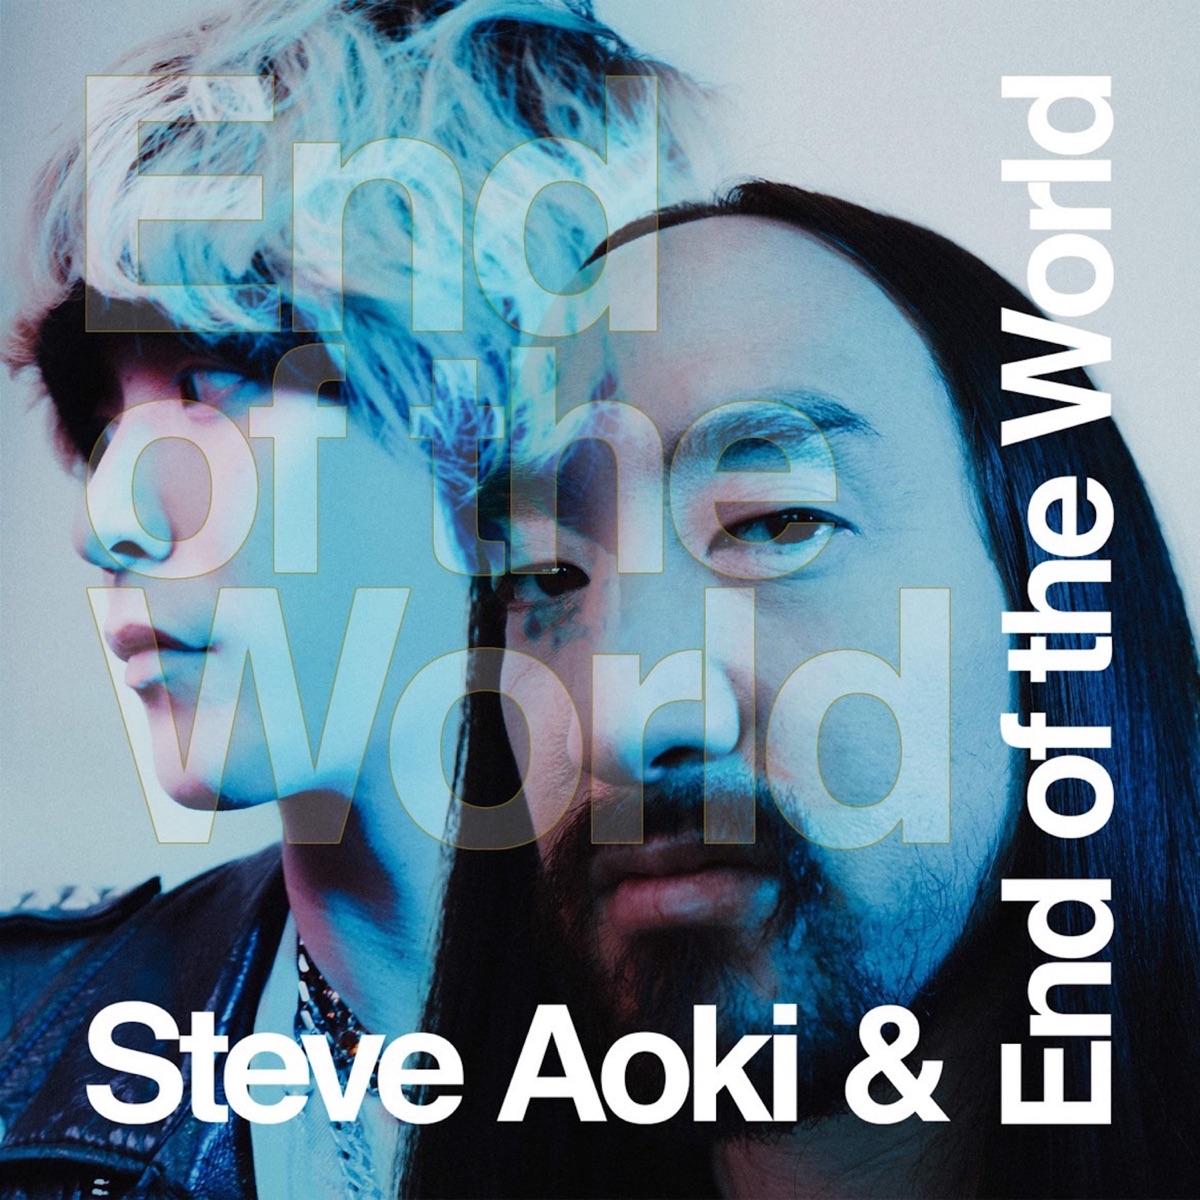 『End of the World & Steve Aoki - END OF THE WORLD』収録の『END OF THE WORLD』ジャケット